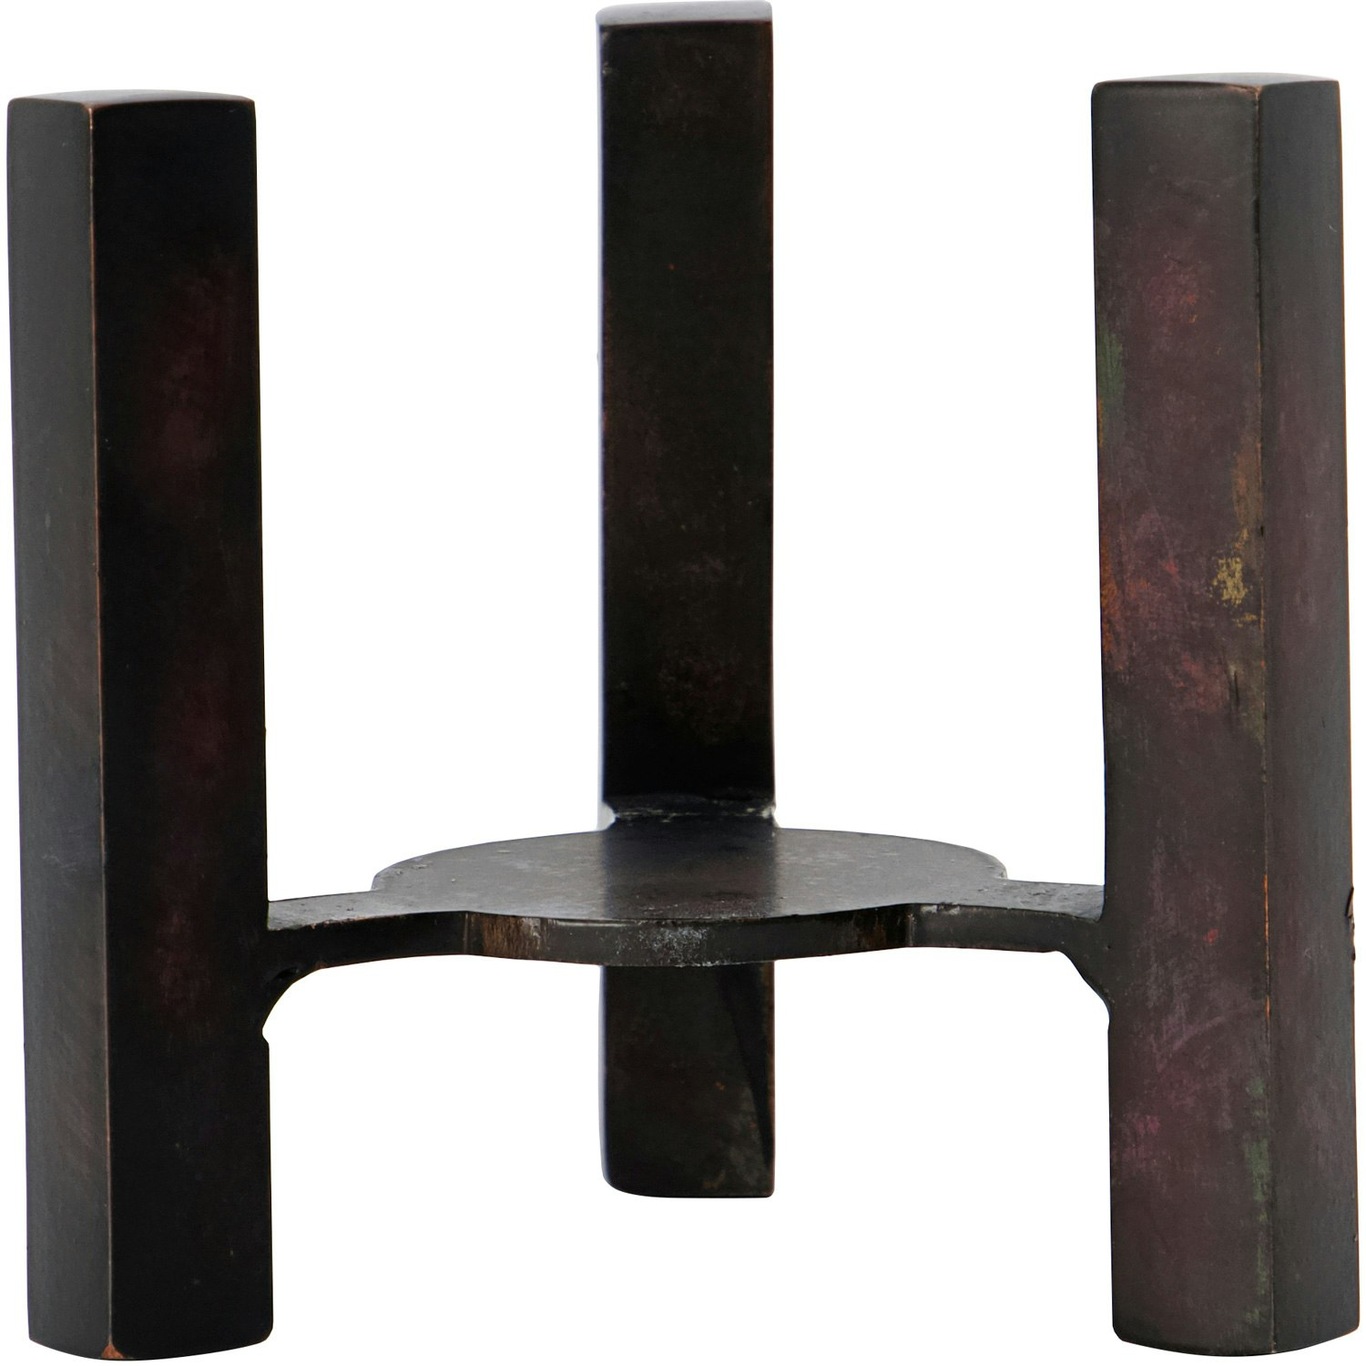 Bejo Candle Stand Antique Brown, 8x7x8 cm